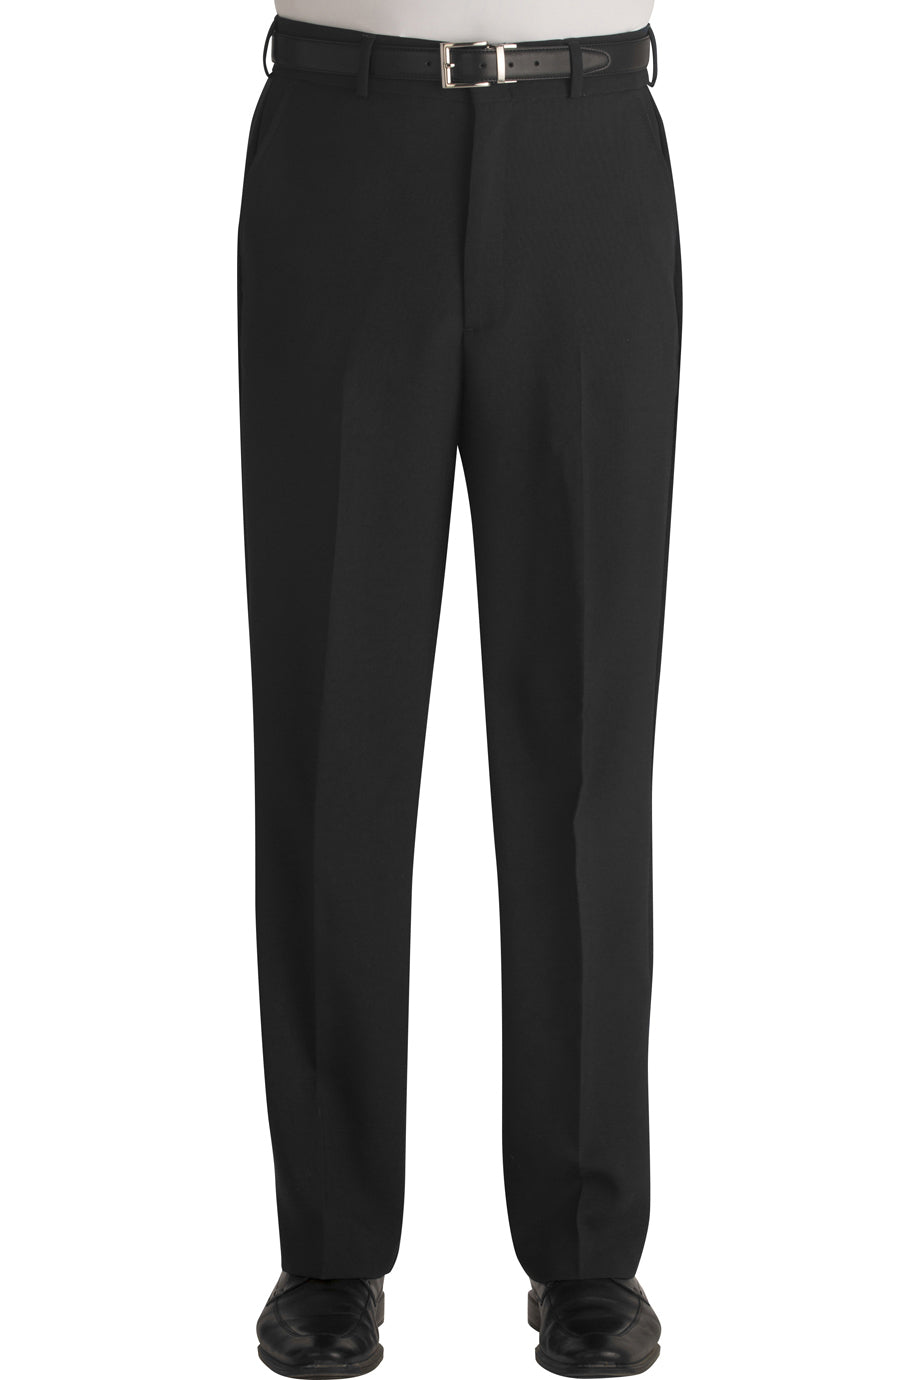 Polyester Flat Front Pant. Mens'